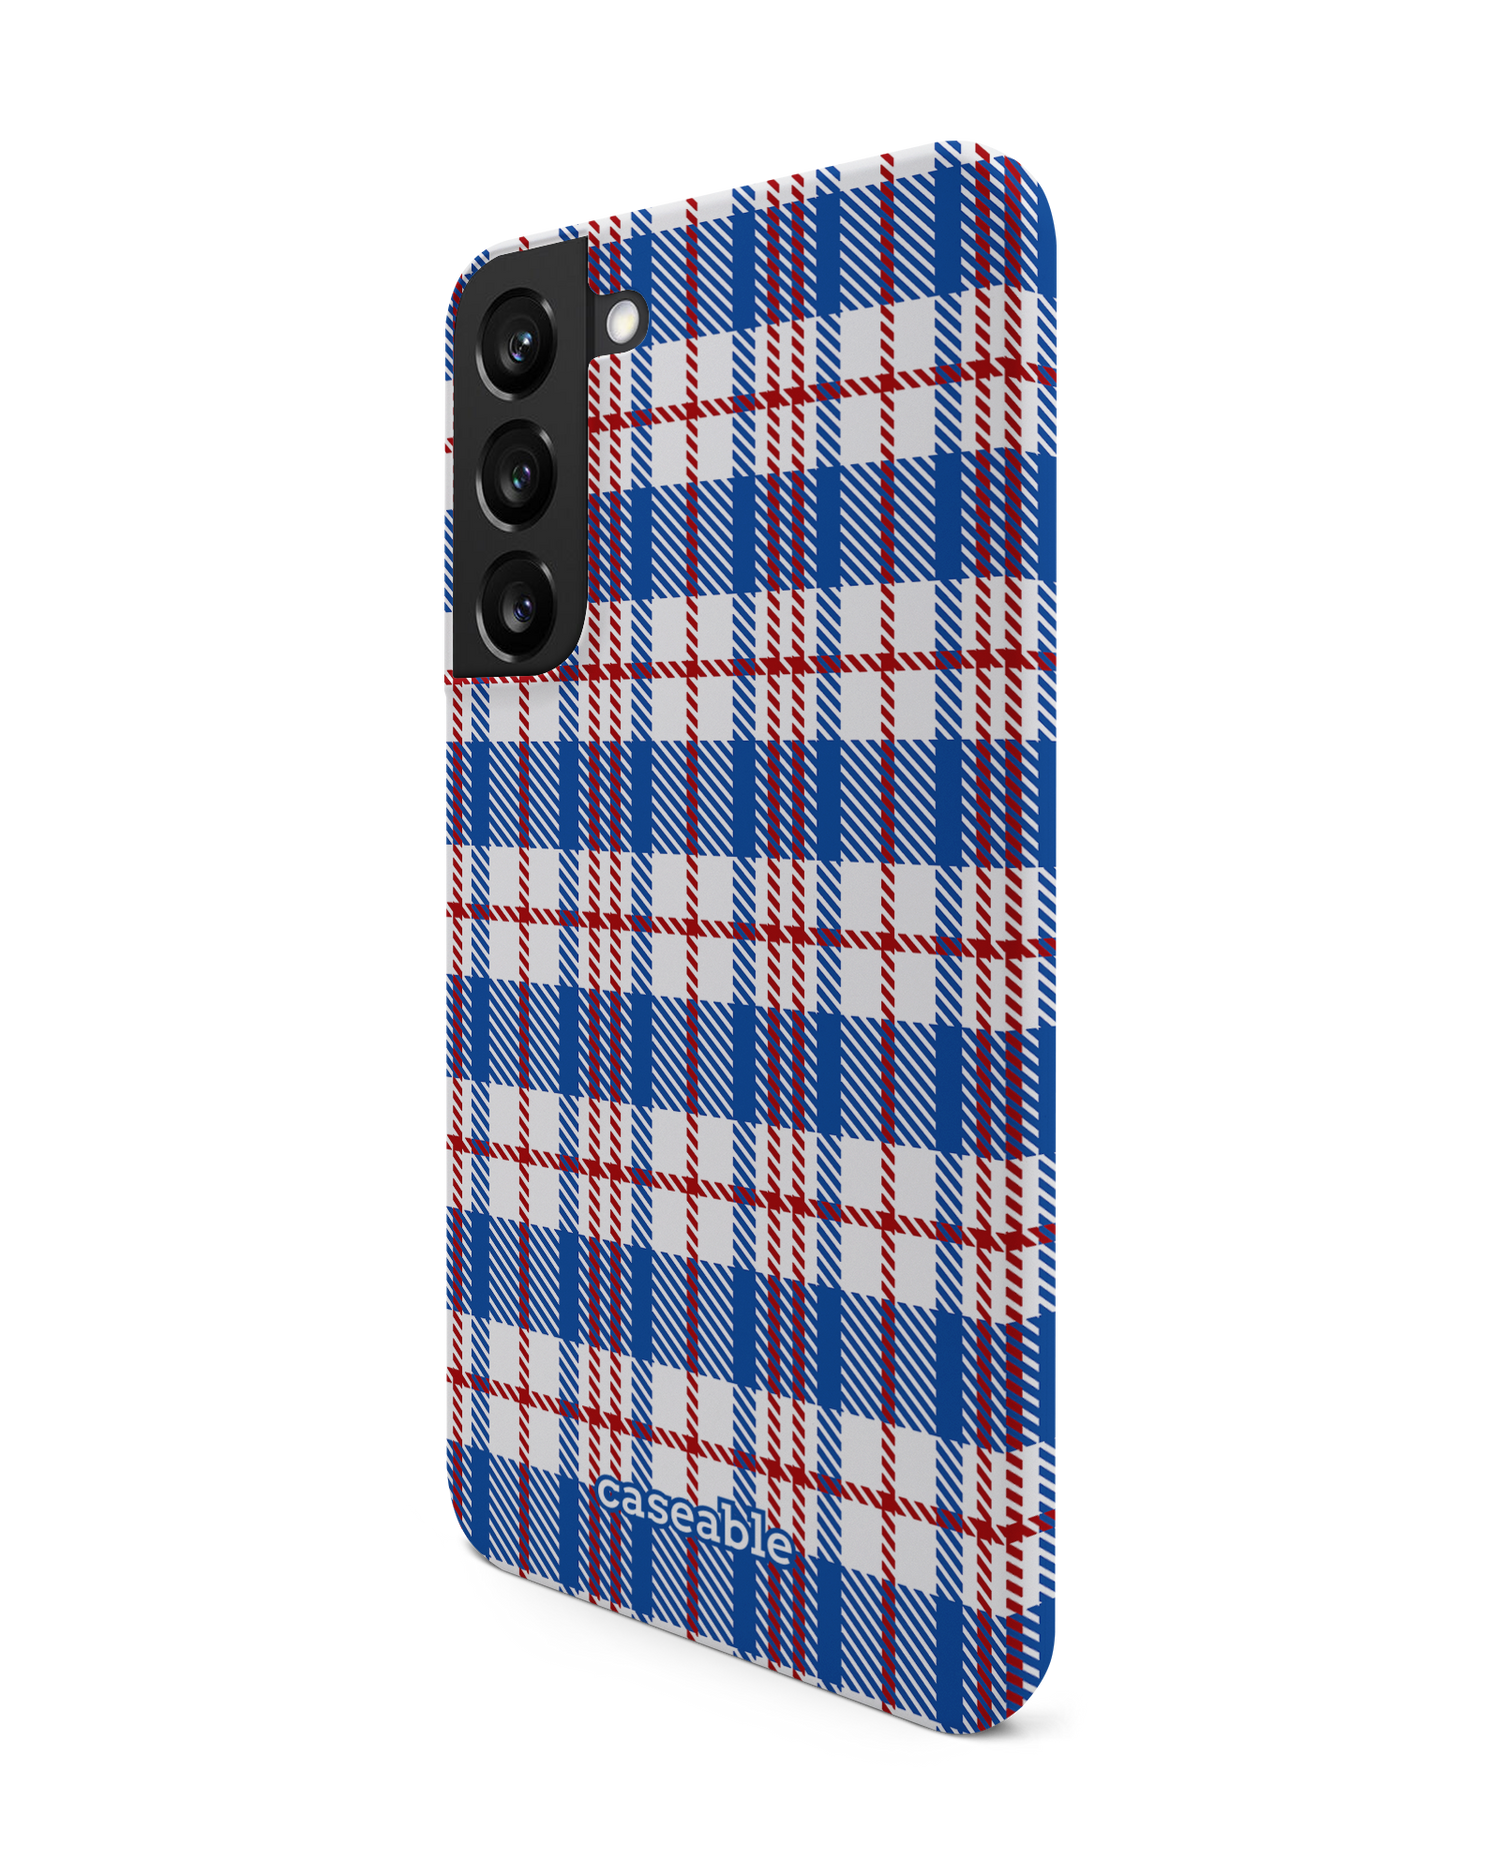 Plaid Market Bag Hard Shell Phone Case Samsung Galaxy S22 Plus 5G: View from the right side